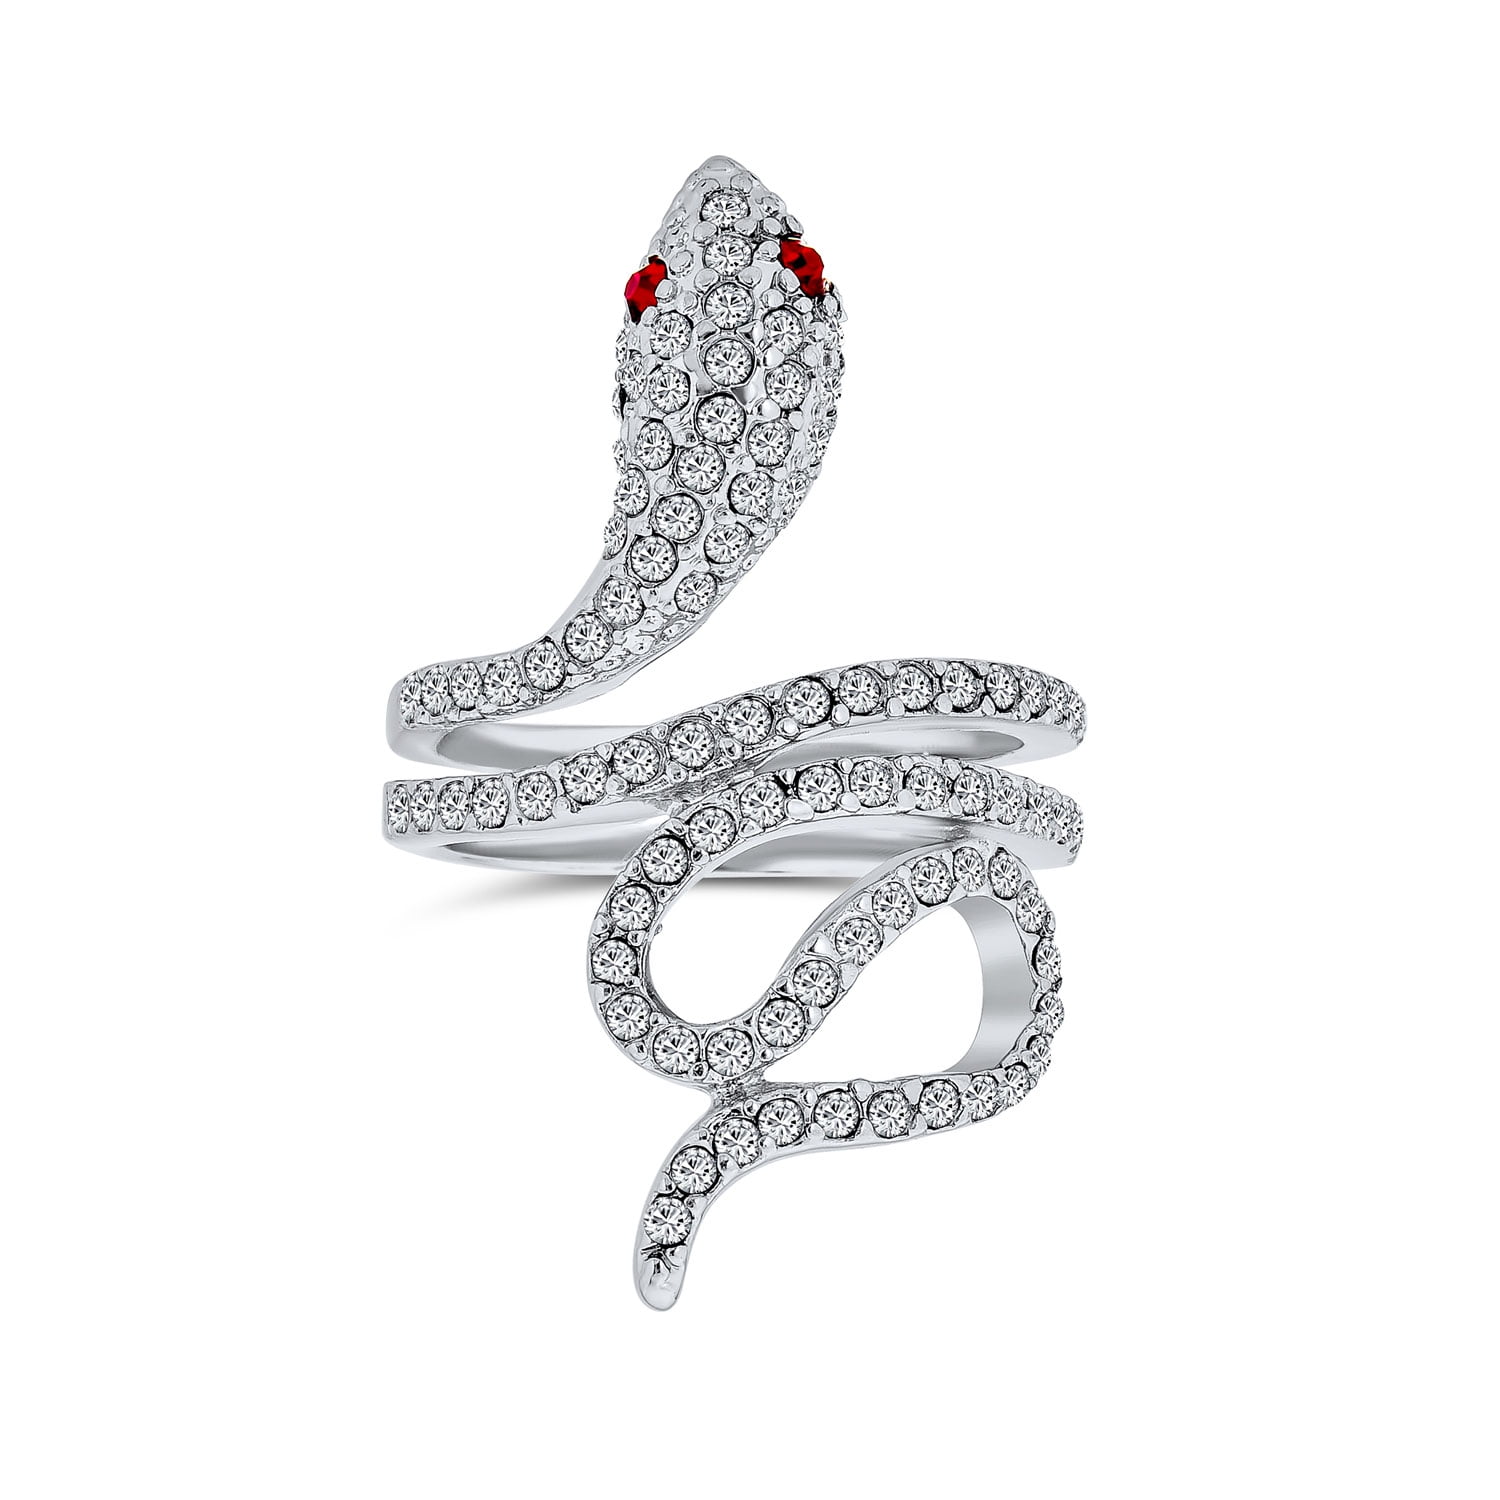 Natural Pave Set Garnet Snake Ring 925 Silver Gold Plated Serpent Ring Jewelry